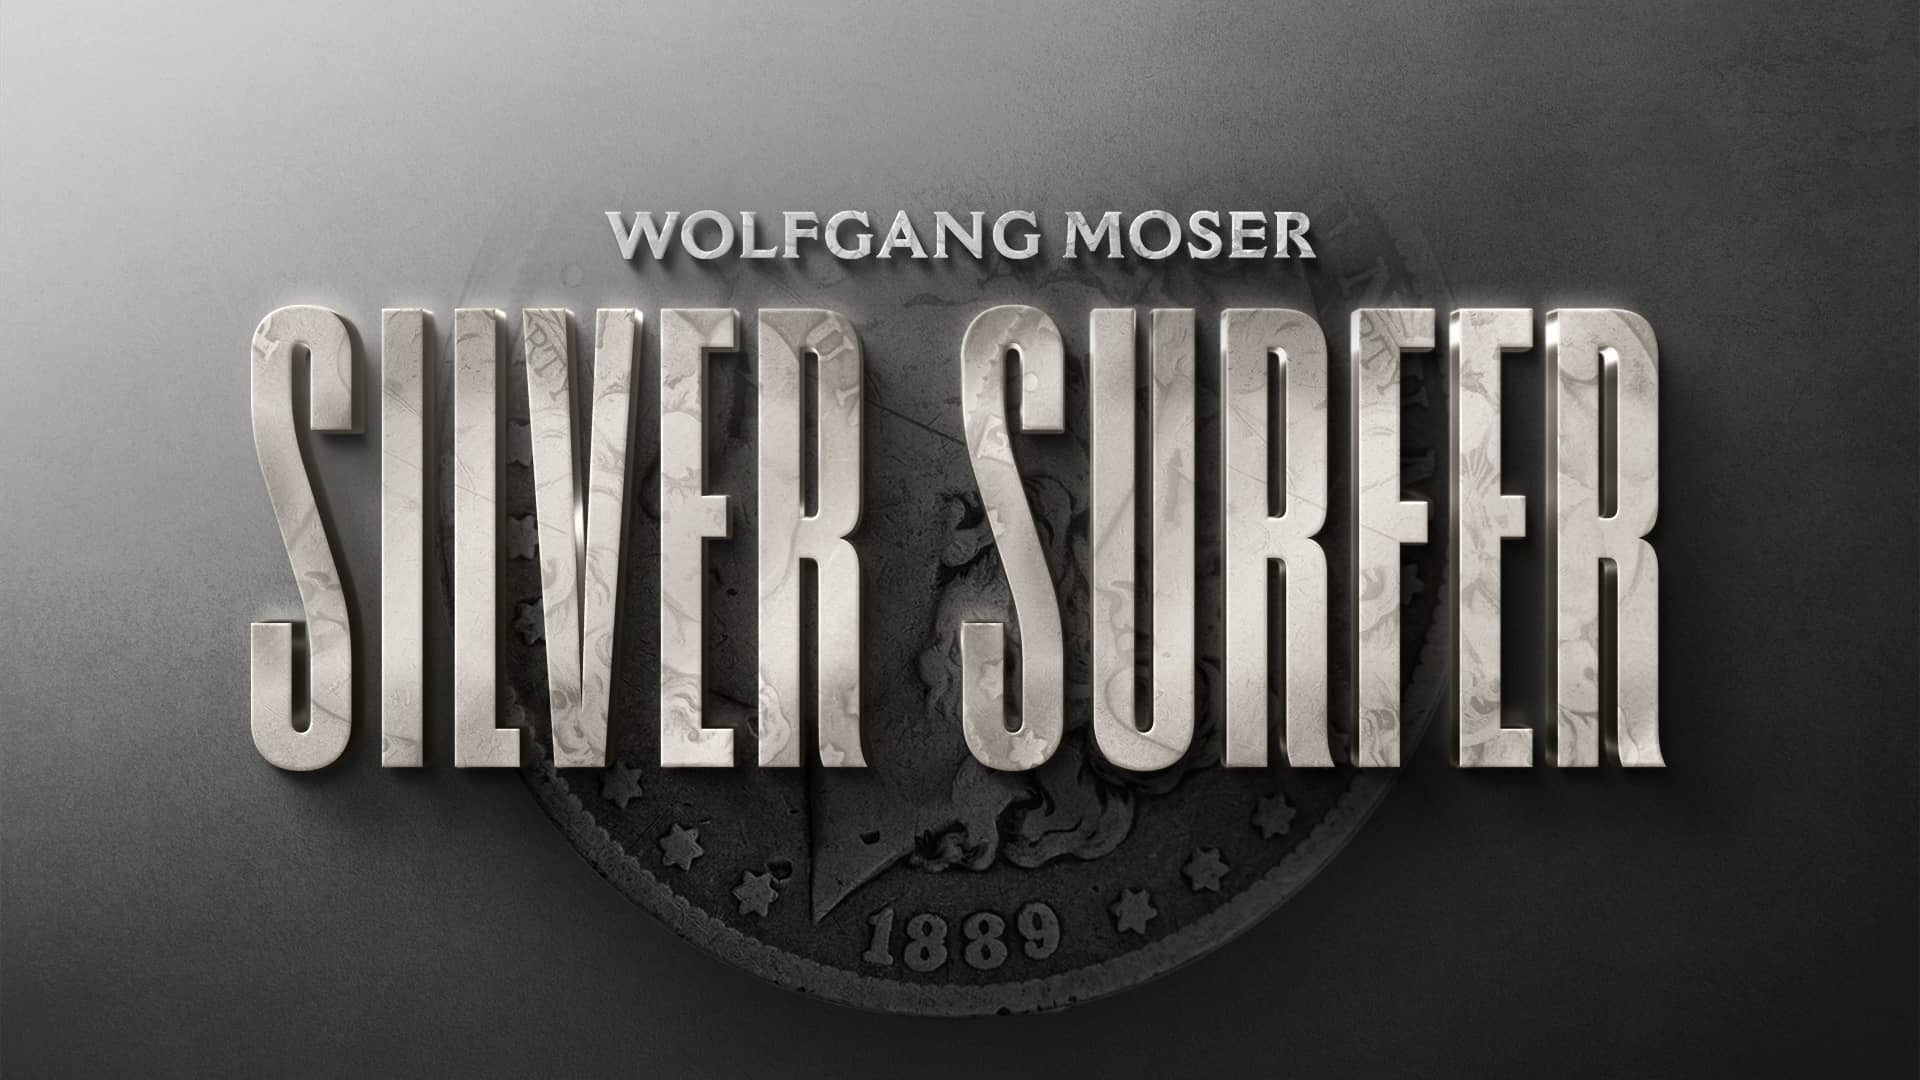 Silver Surfer by Wolfgang Moser (MP4 Video Download 1080p FullHD Quality)